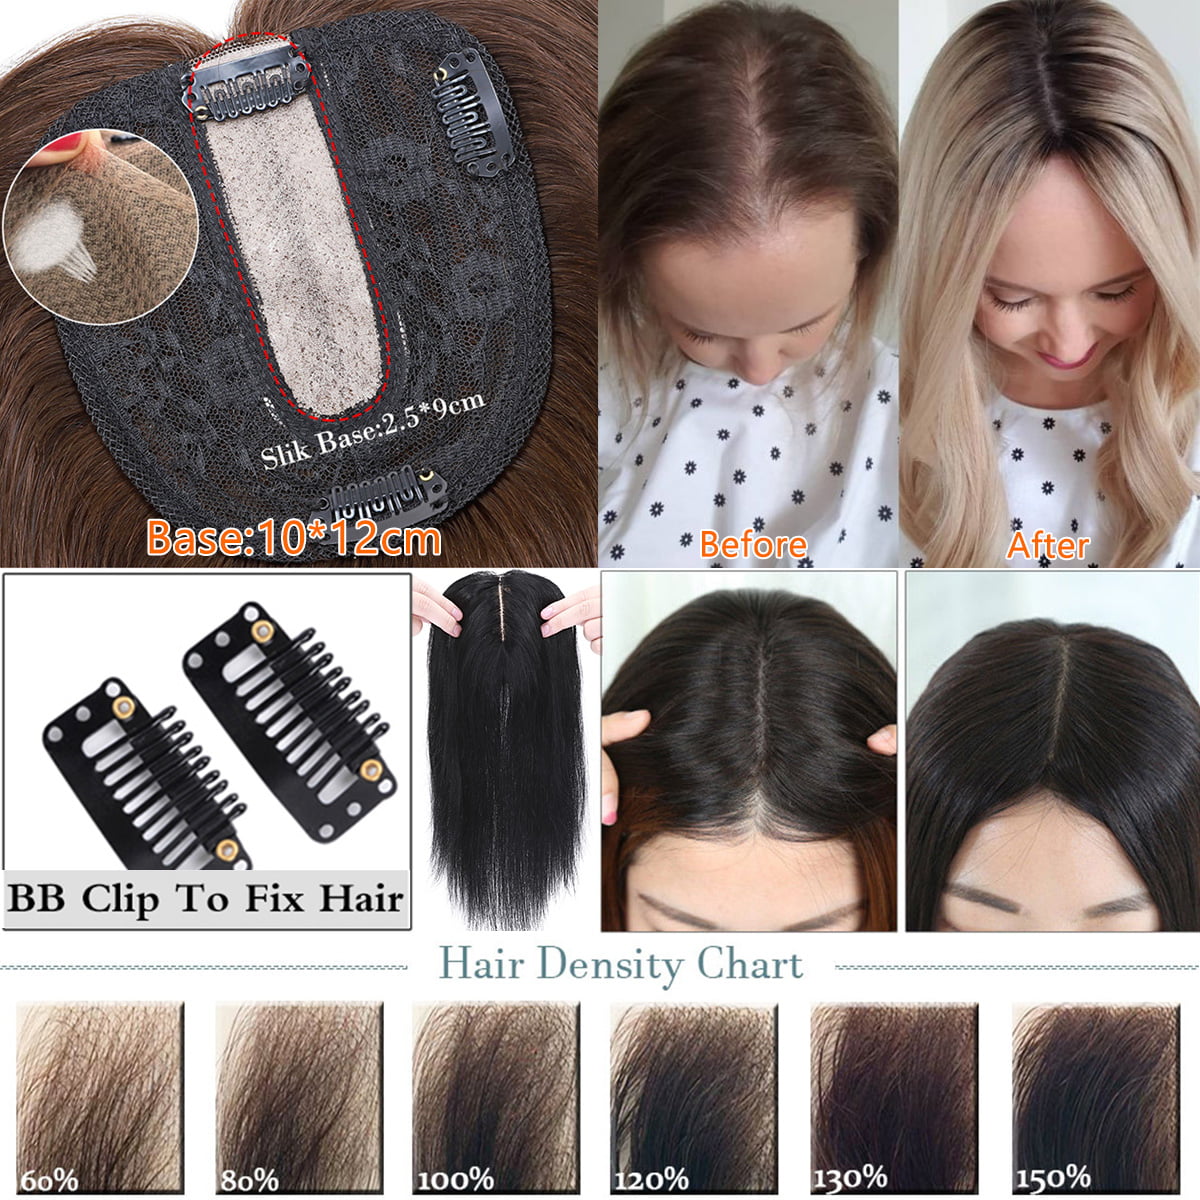 SEGO Clip in Hair Extensions Human Hair Toppers 100% Real Human Hair Topper  for Thinning/Loss Hair Natural Black Hair Pieces 